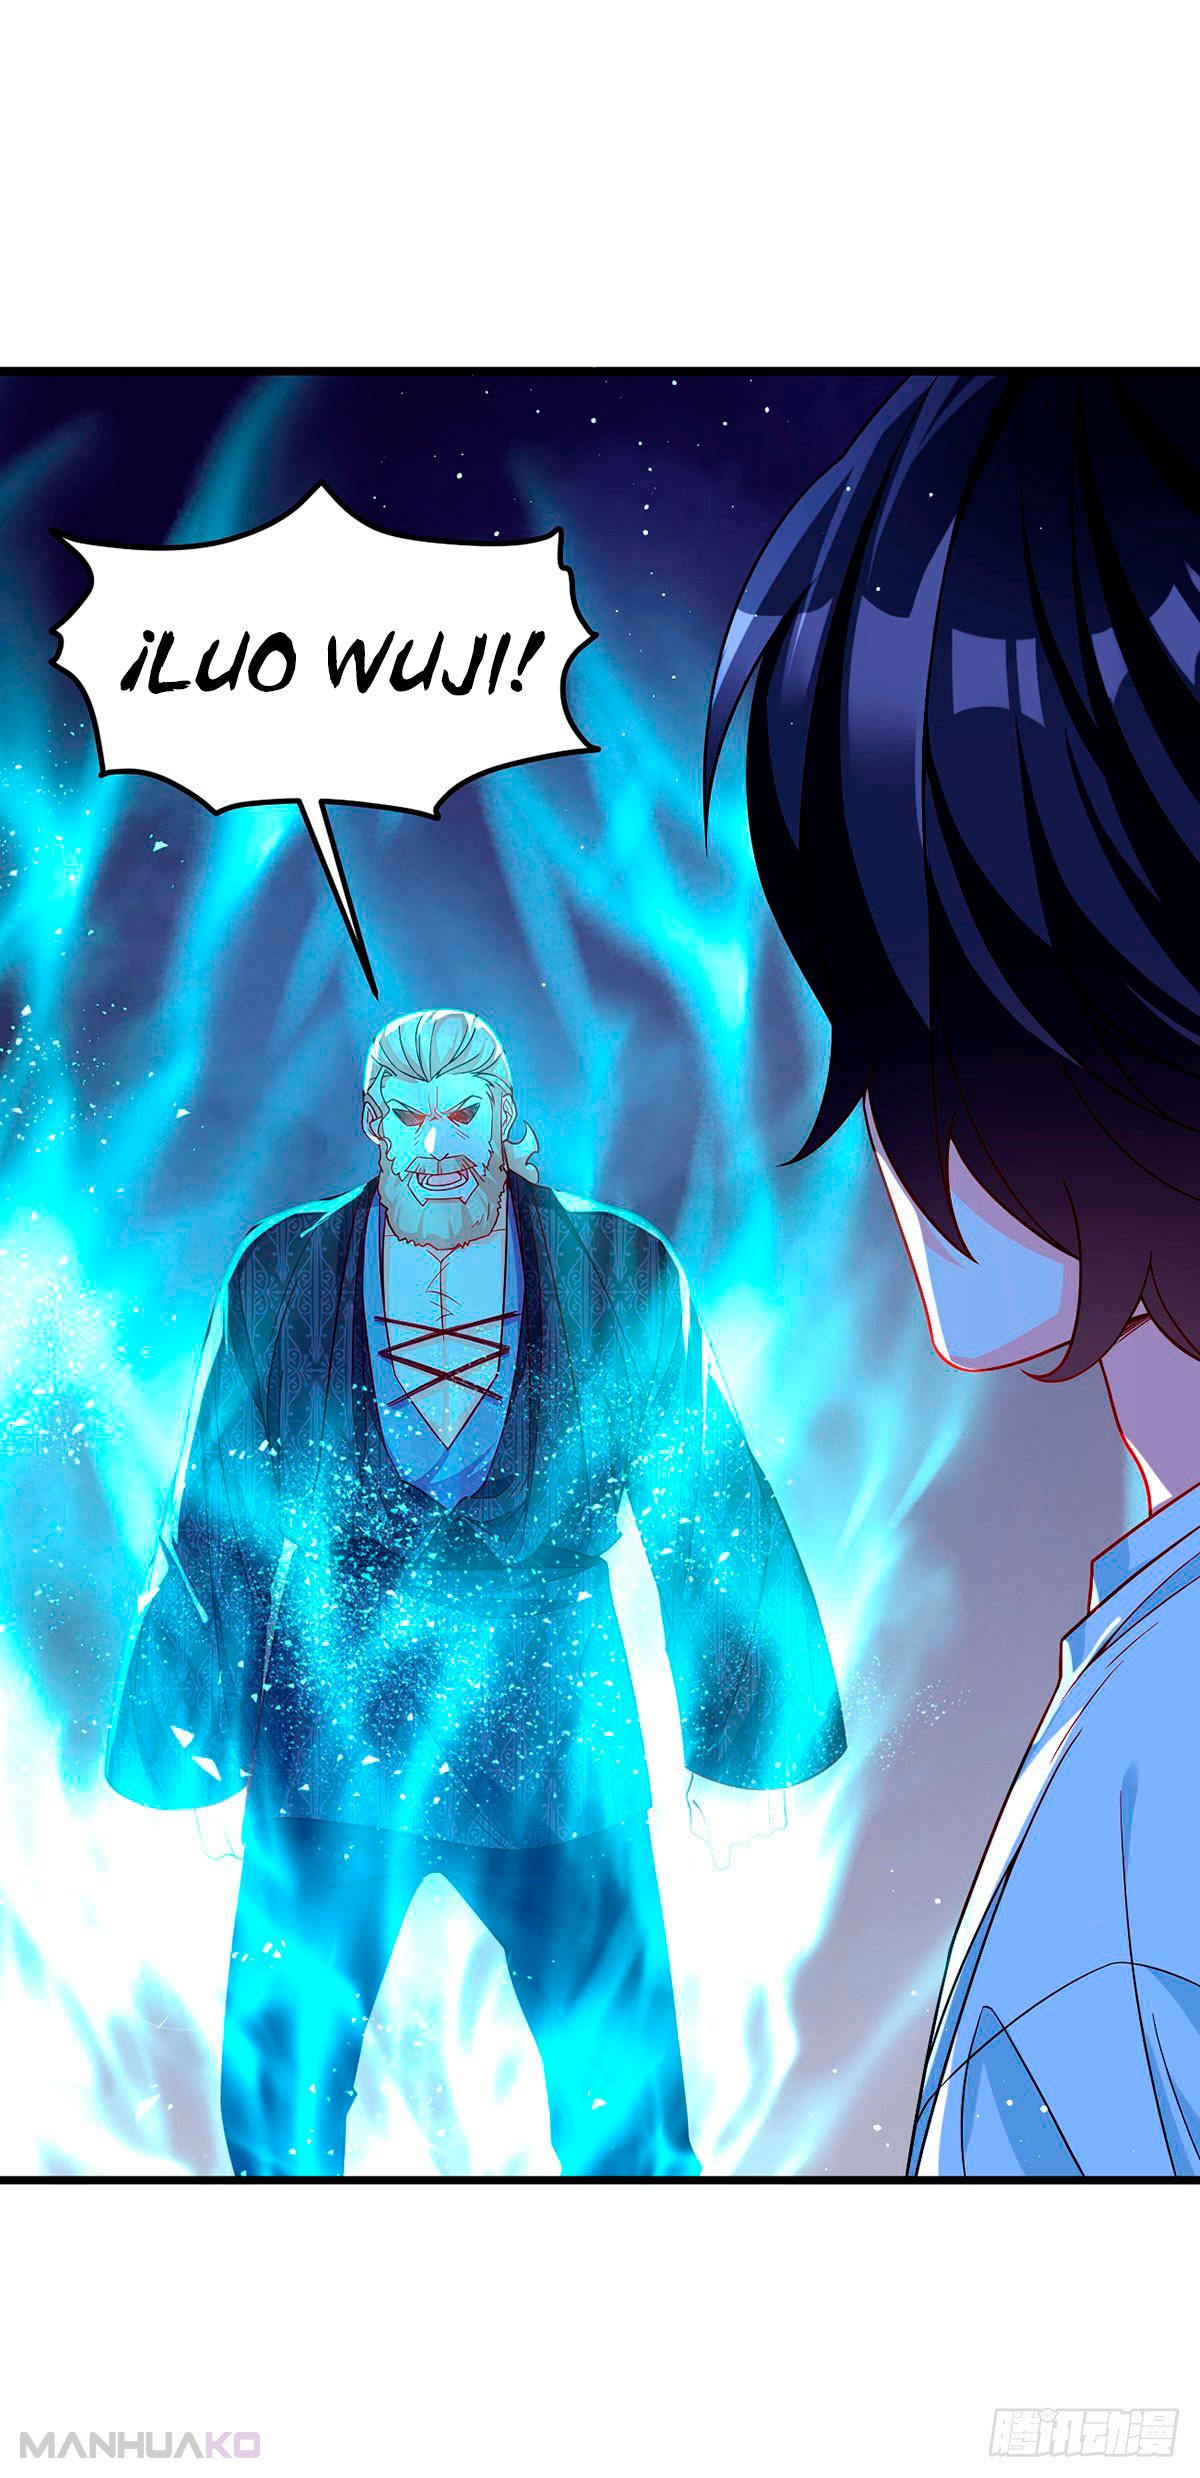 Manga The Immortal Emperor Luo Wuji Has Returned Chapter 188 image number 44